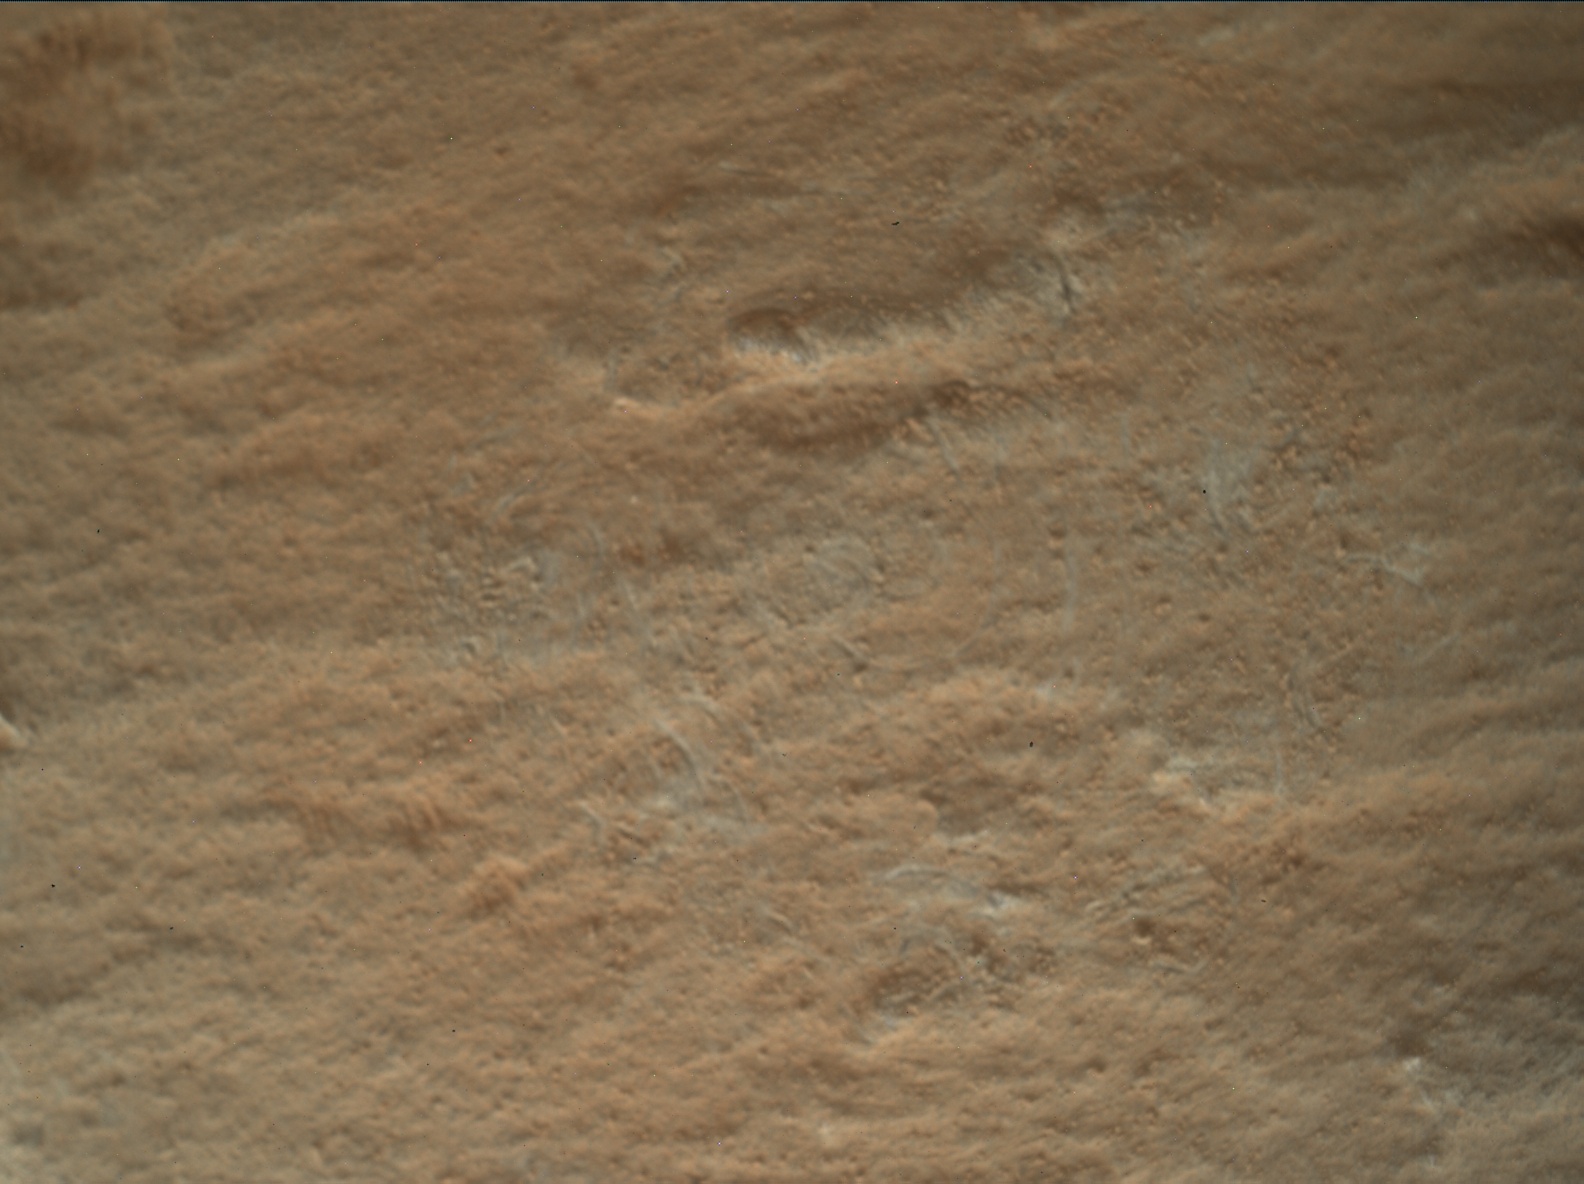 Nasa's Mars rover Curiosity acquired this image using its Mars Hand Lens Imager (MAHLI) on Sol 2662